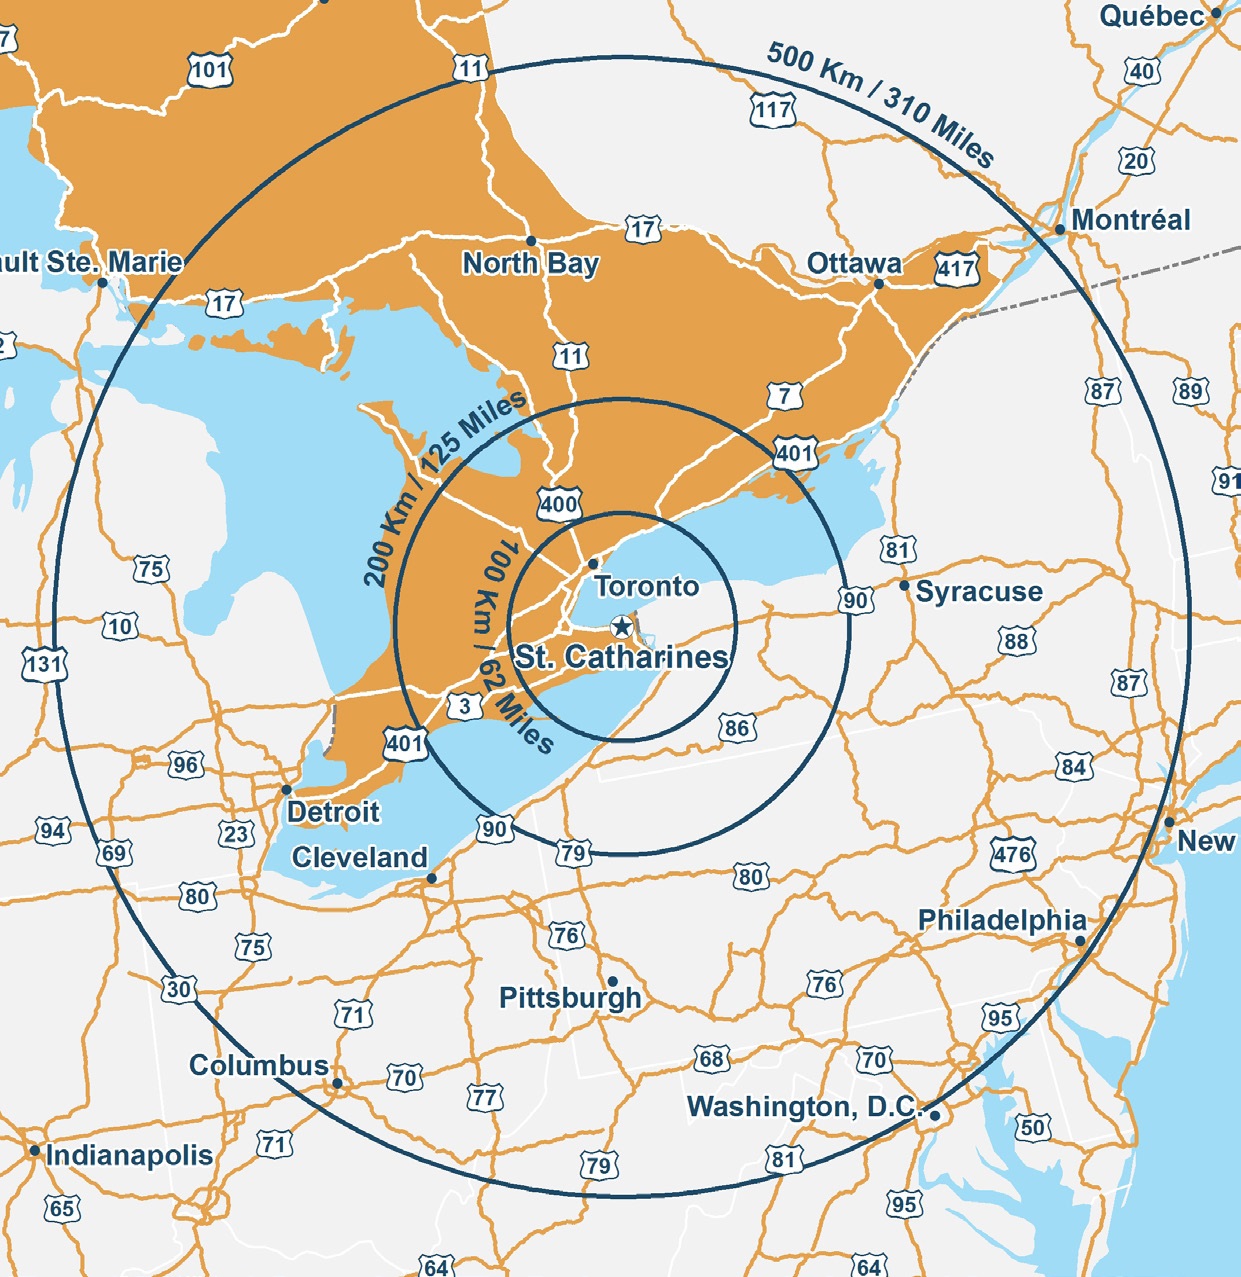 Map showing St. Catharines at the centre surrounded by three circle representing a radius of 100 km/62 miles, a radius of 200 km/125 miles and a radius of 500 km/310 miles. Indicated on the map is the following:- Toronto is within 100 km/62 miles from St. Catharine’s.- Columbus, Pittsburgh, Washington D.C., Philadelphia, Syracuse, Ottawa, North Bay, Detroit and Cleveland are within 500 km/310 miles from St. Catharine’s.- Indianapolis, New York, Montreal and Sault Ste. Marie are just beyond 500 km/310 miles from St. Catharine’s.